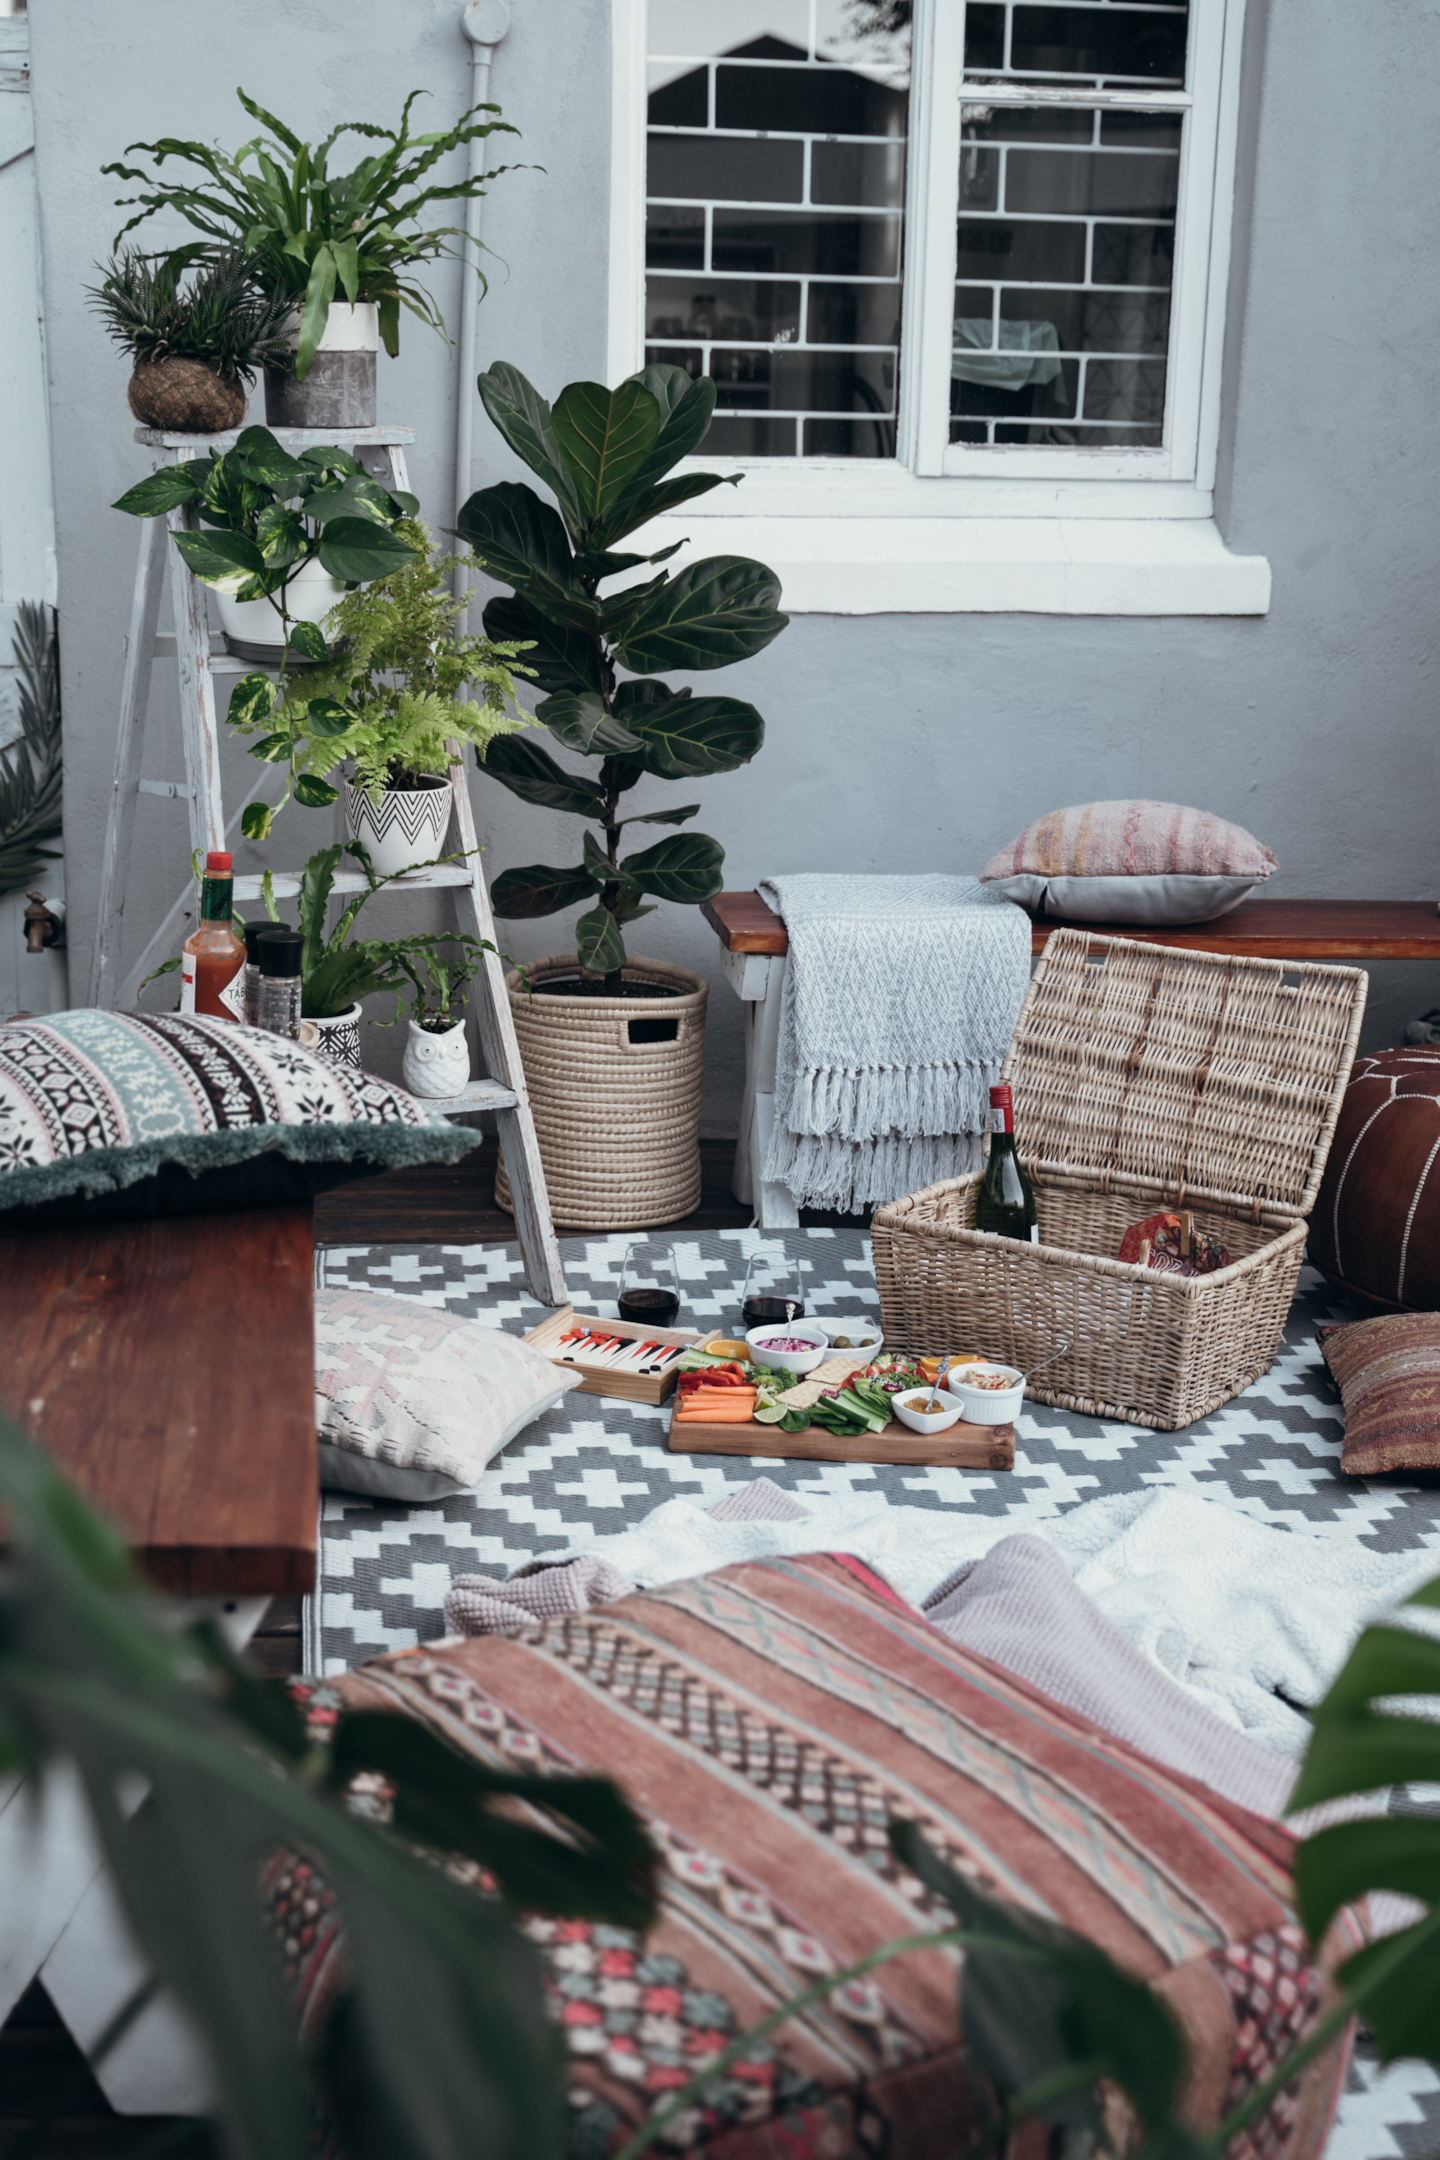 Picnic at Home | Photo by Taryn Elliott from Pexels | https://www.pexels.com/photo/a-picnic-set-up-at-a-patio-4374581/